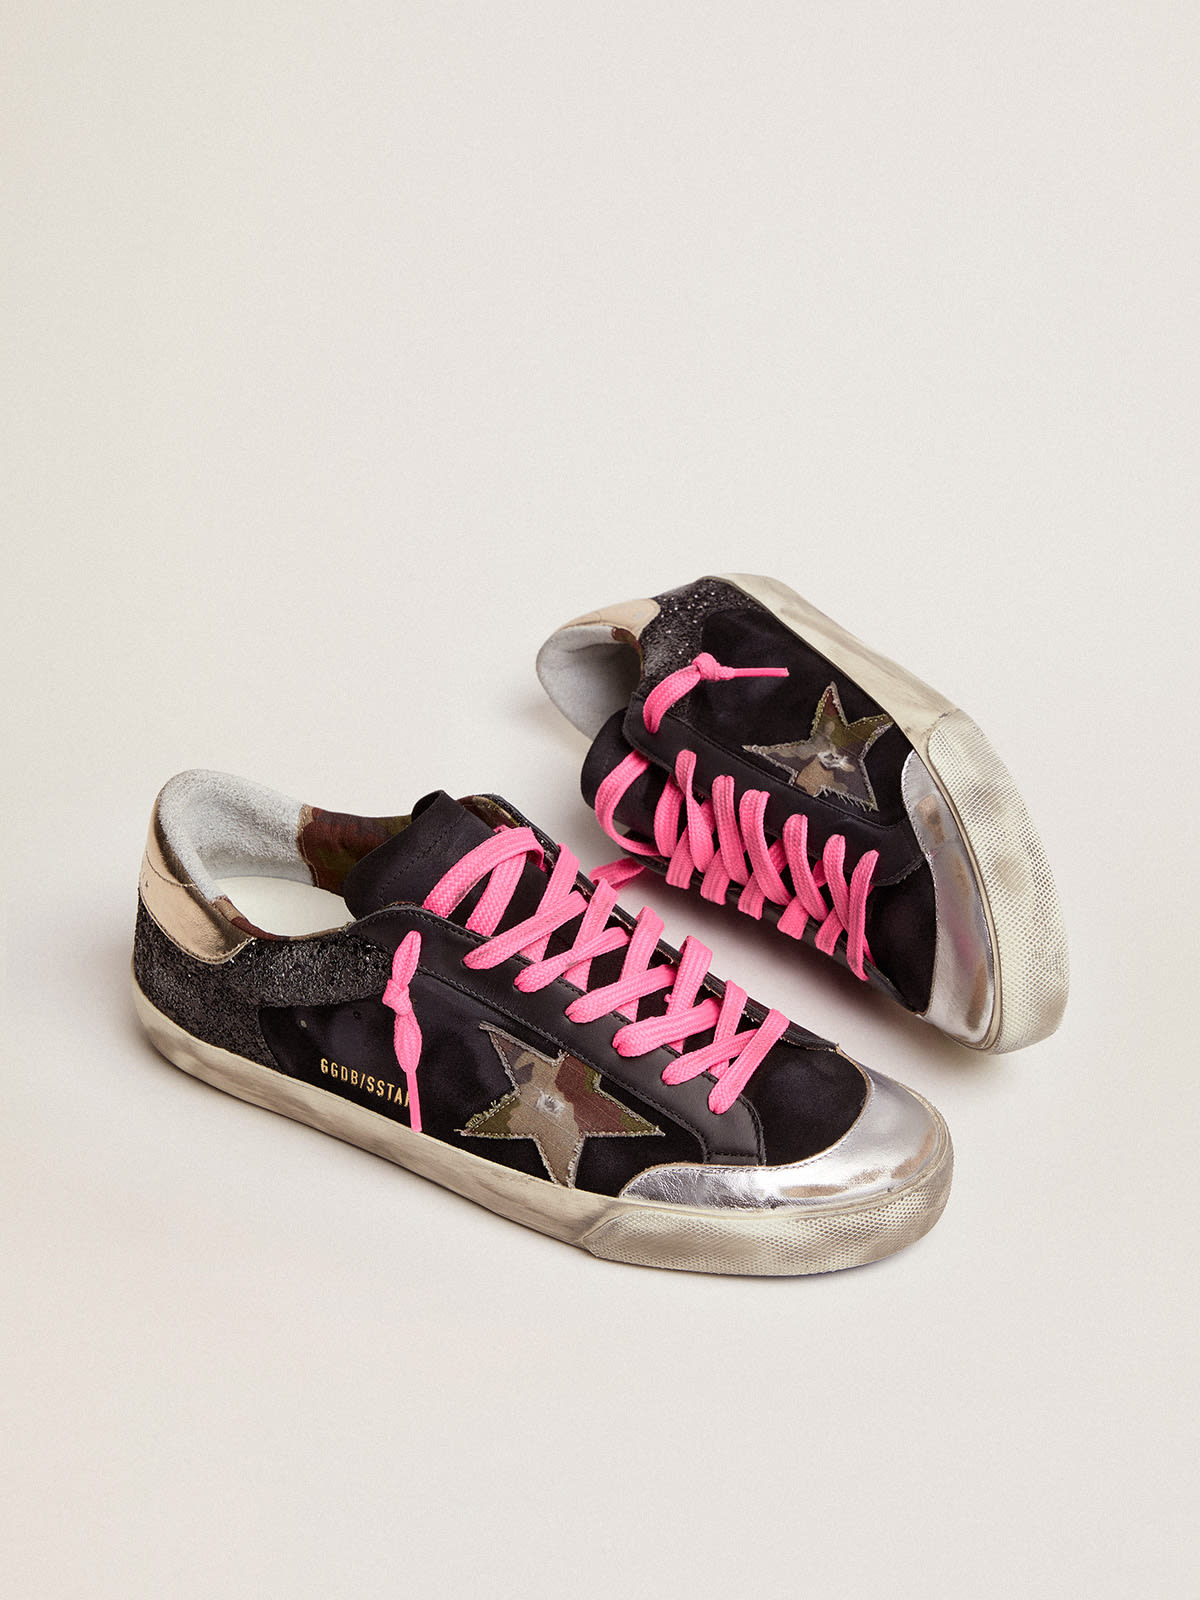 Golden Goose - Men's Super-Star in black glitter and suede with camouflage star in 